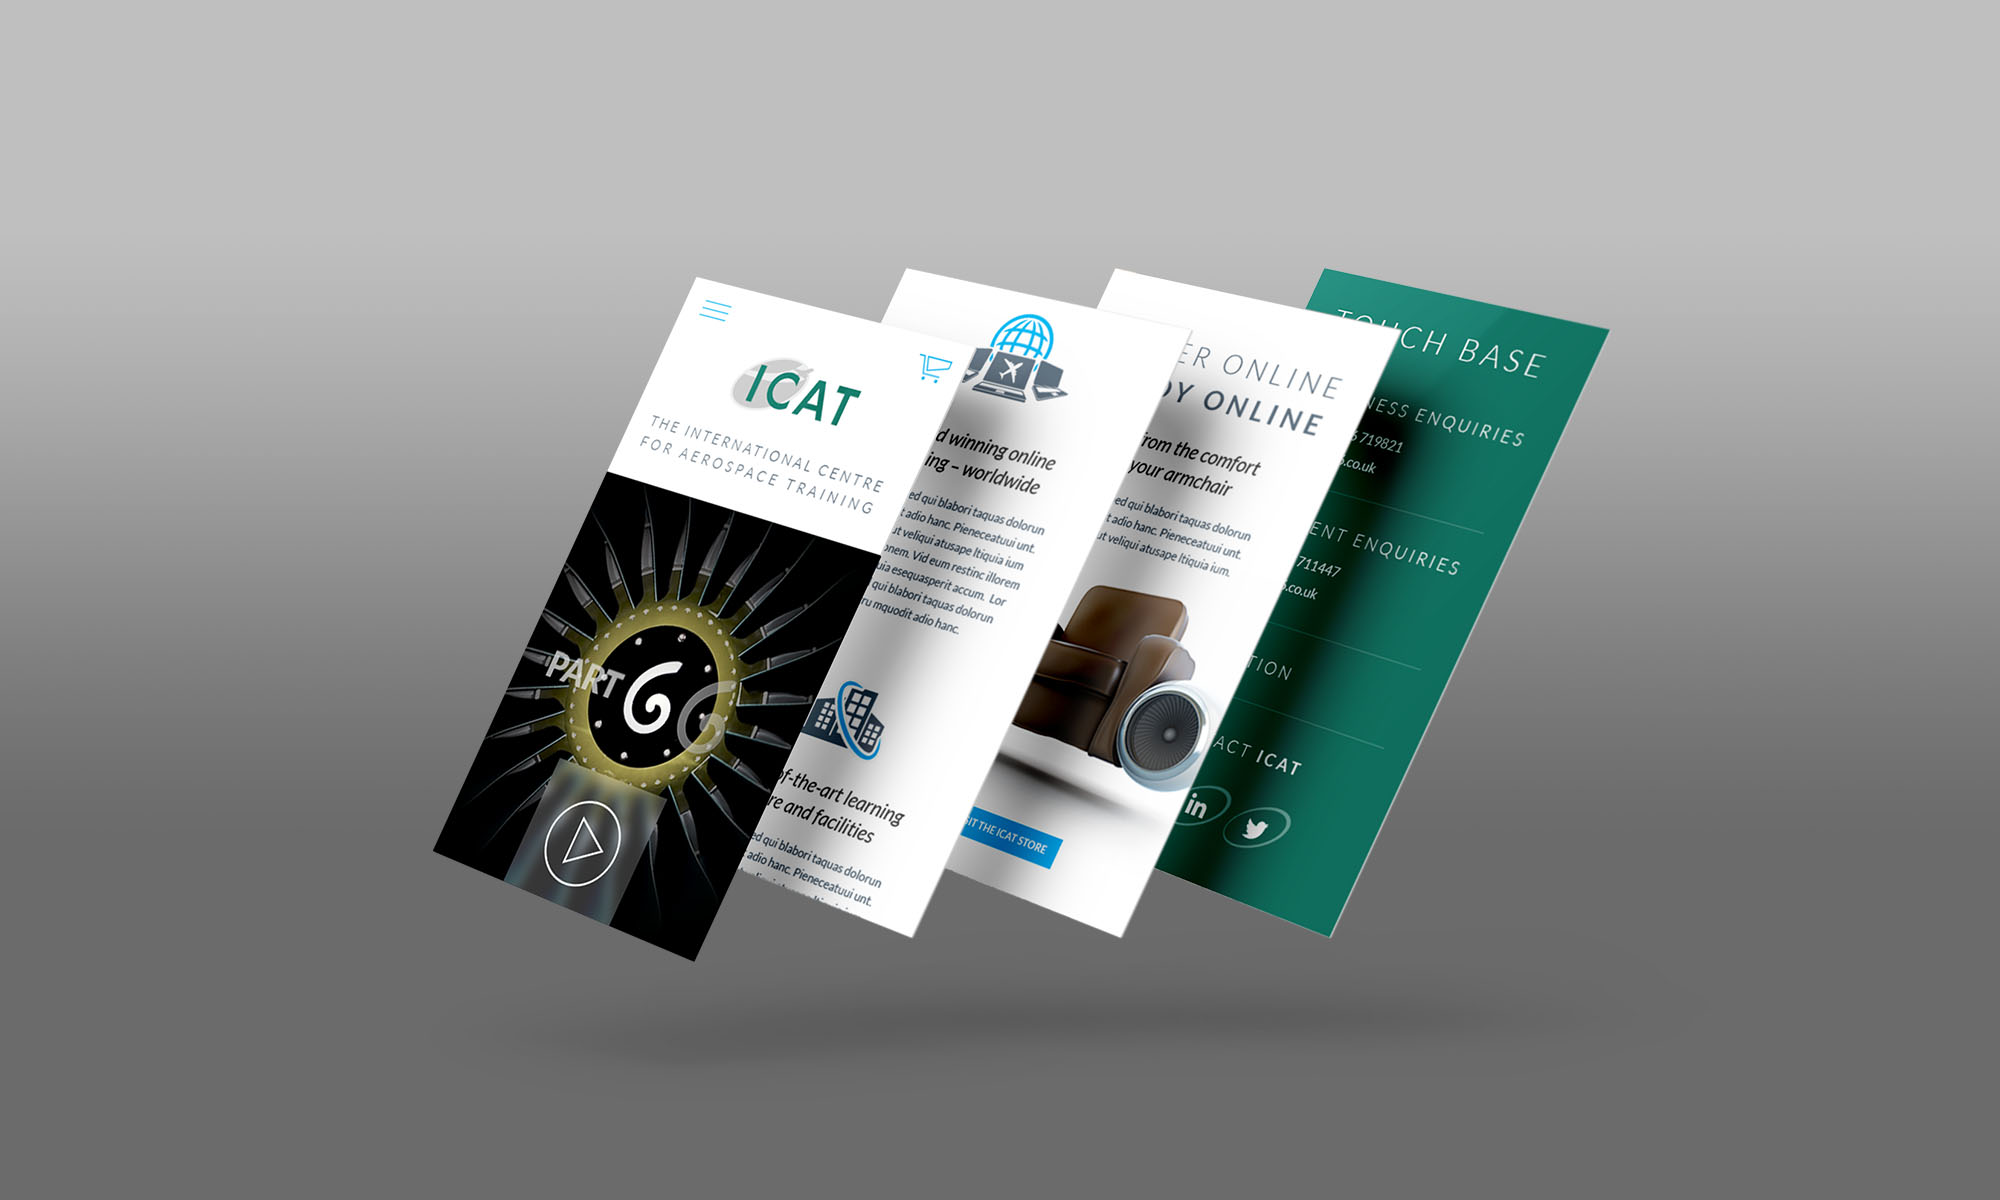 Responsive website commissioned by ICAT